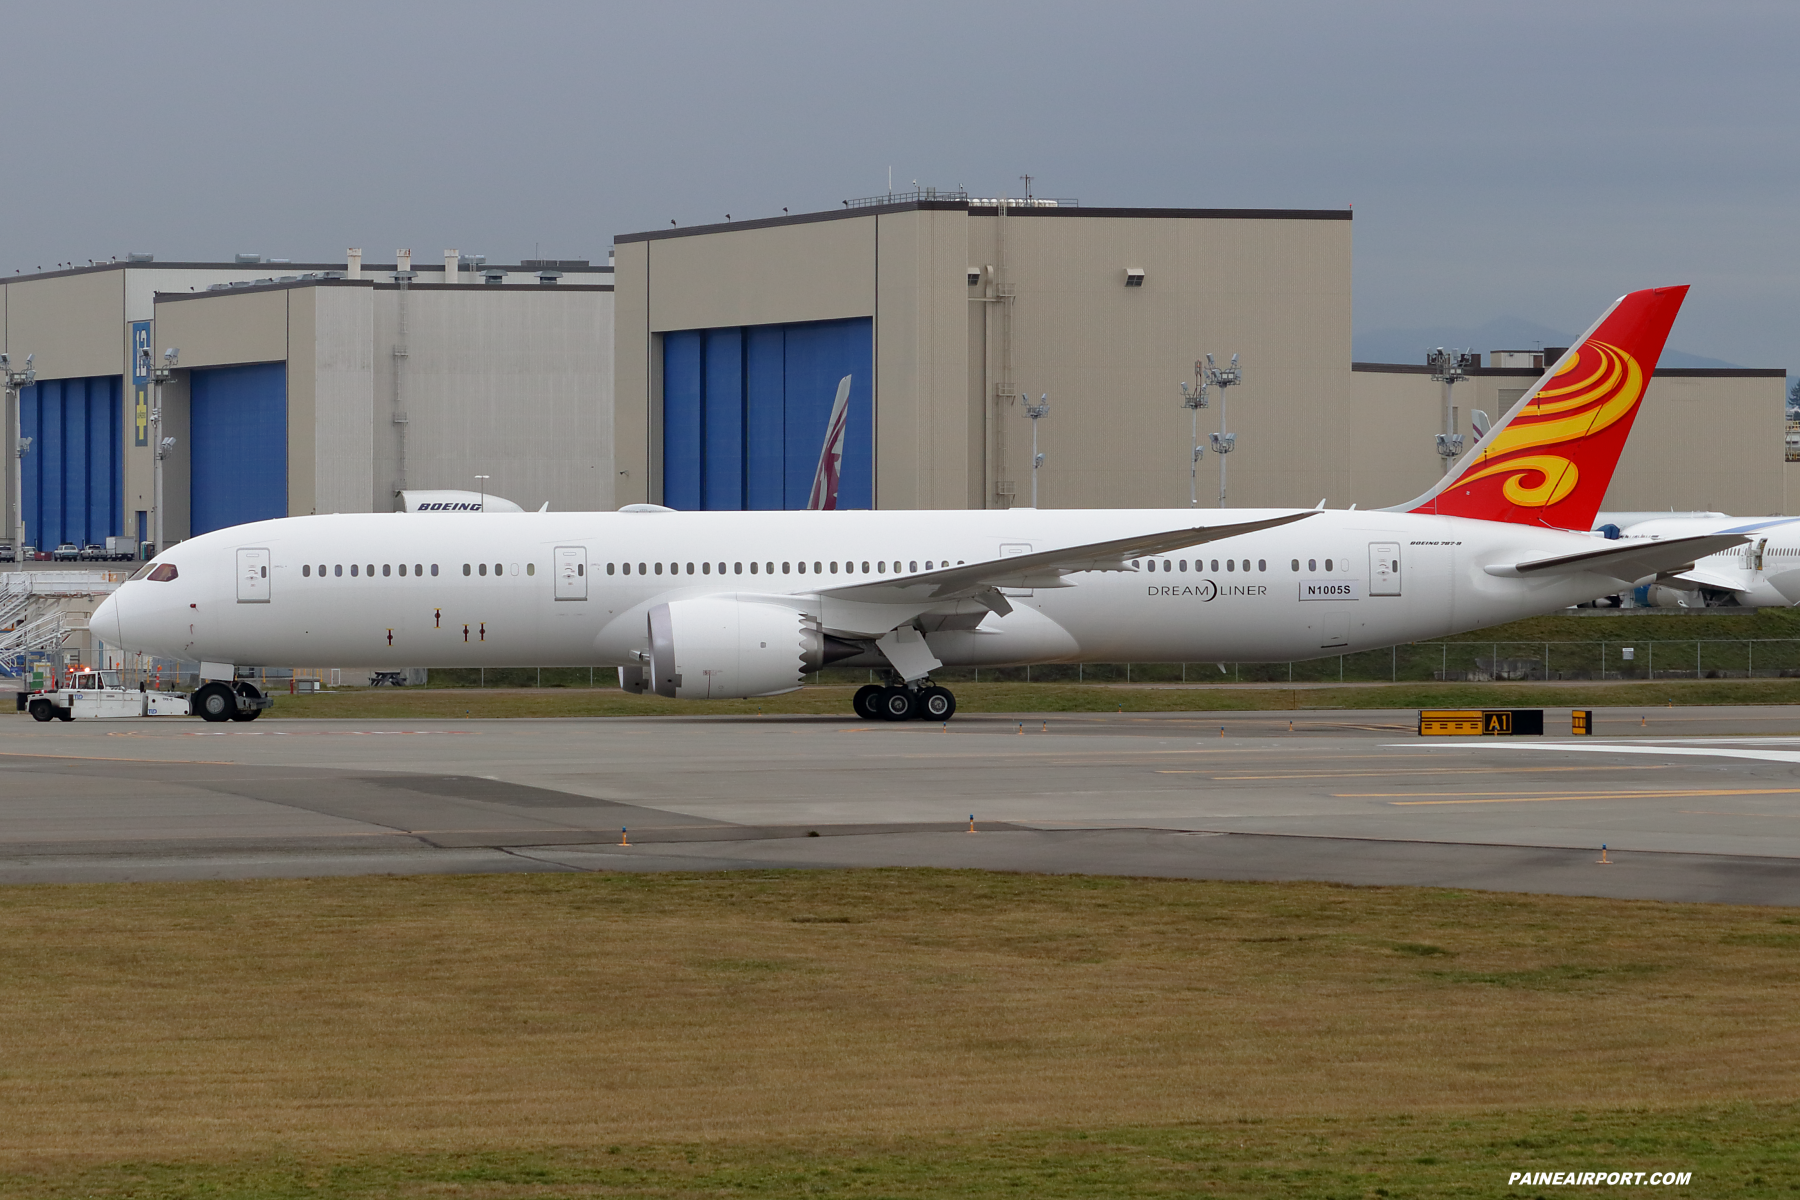 787-9 line 887 at Paine Field